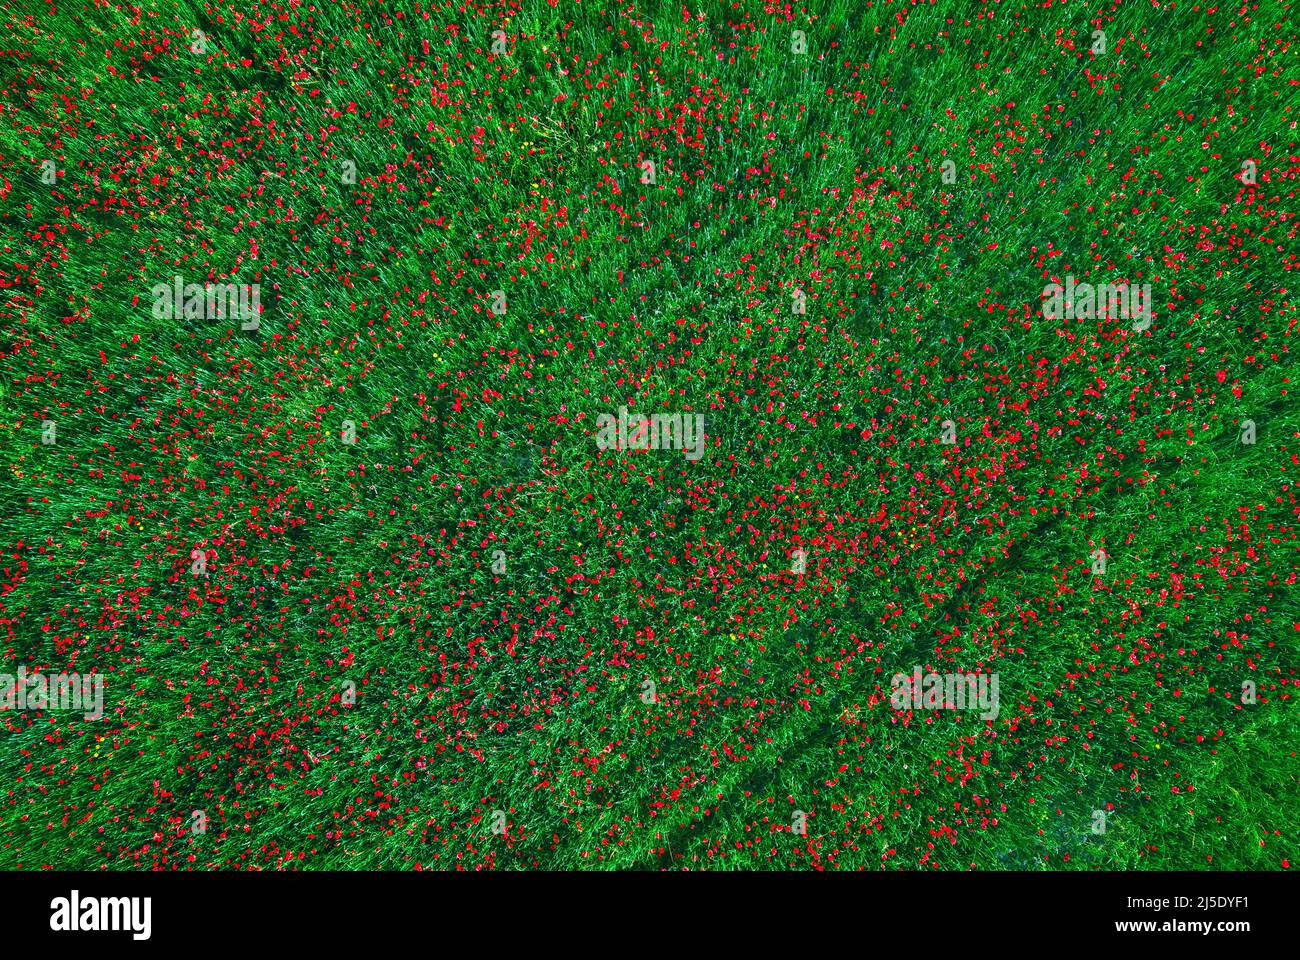 Field with green grass and red poppy flowers, abstract aerial background Stock Photo